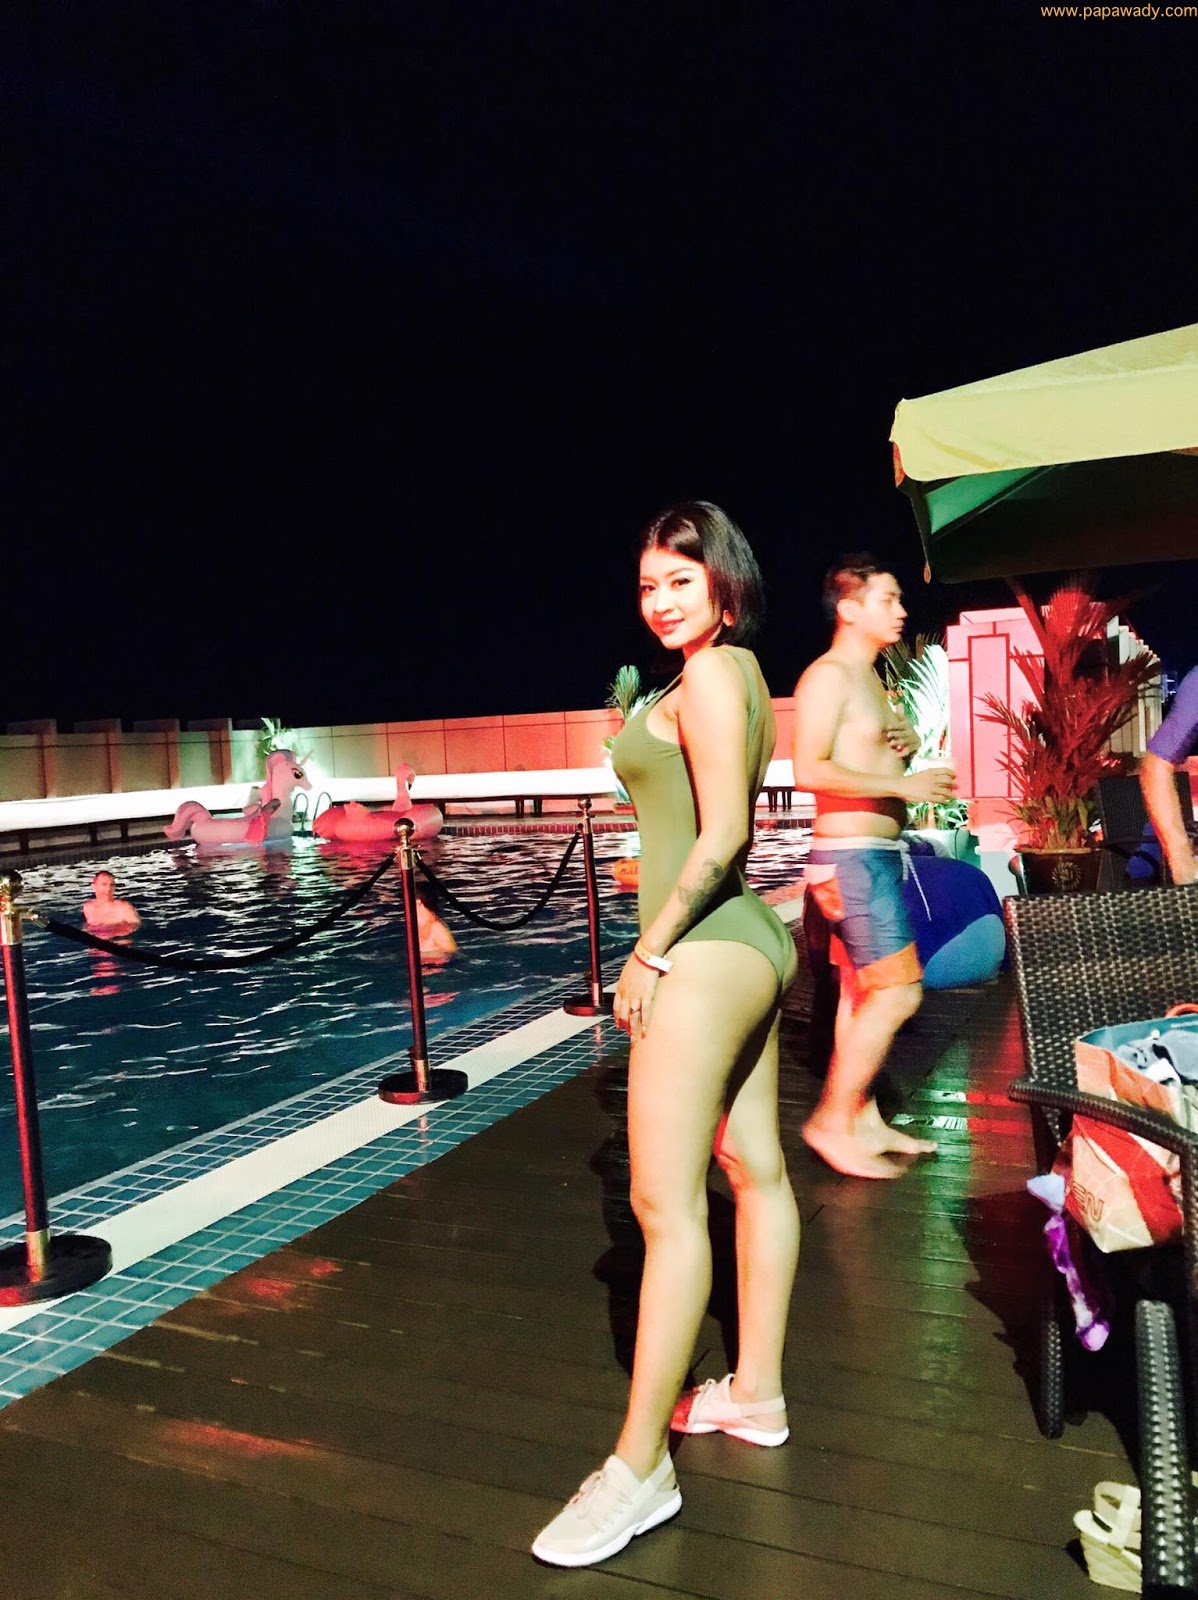 Chaw Kalayar Pool Party Snaps and She replies to critics on Facebook 